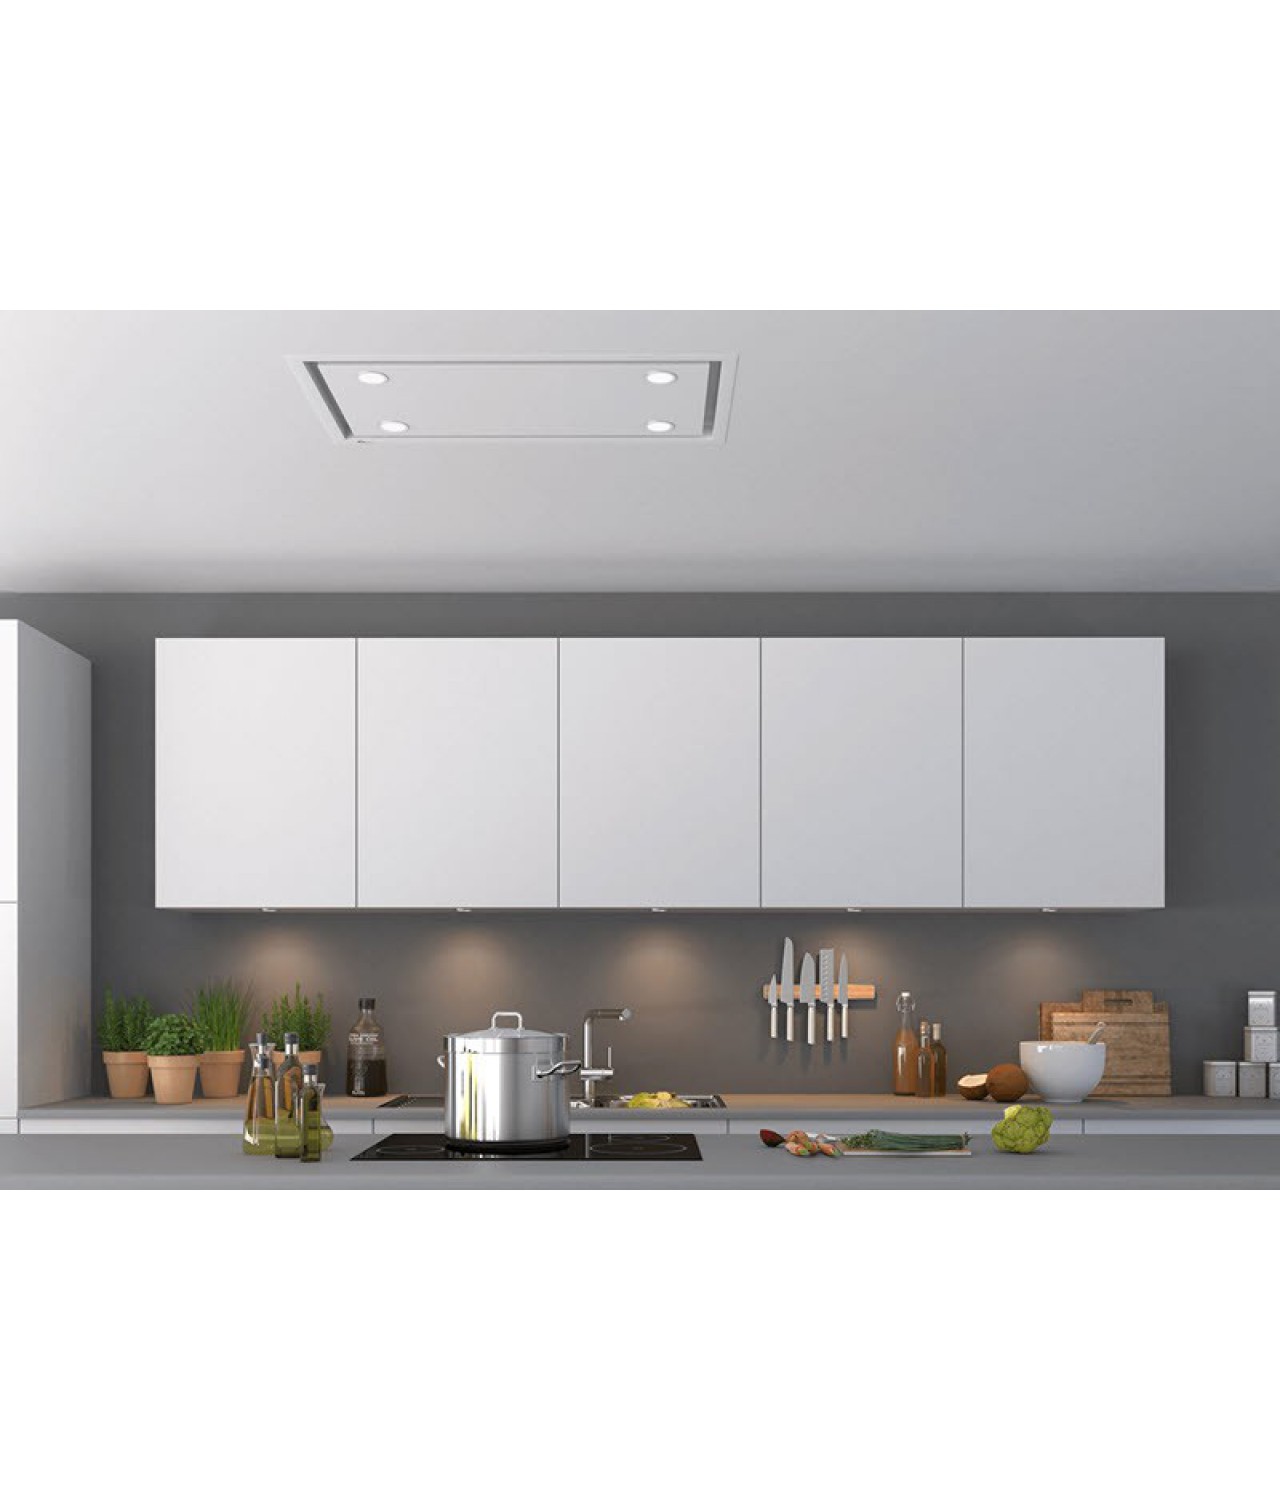 Ceiling integrated cooker hood Newcastle Medio 900 white - installed in ceiling